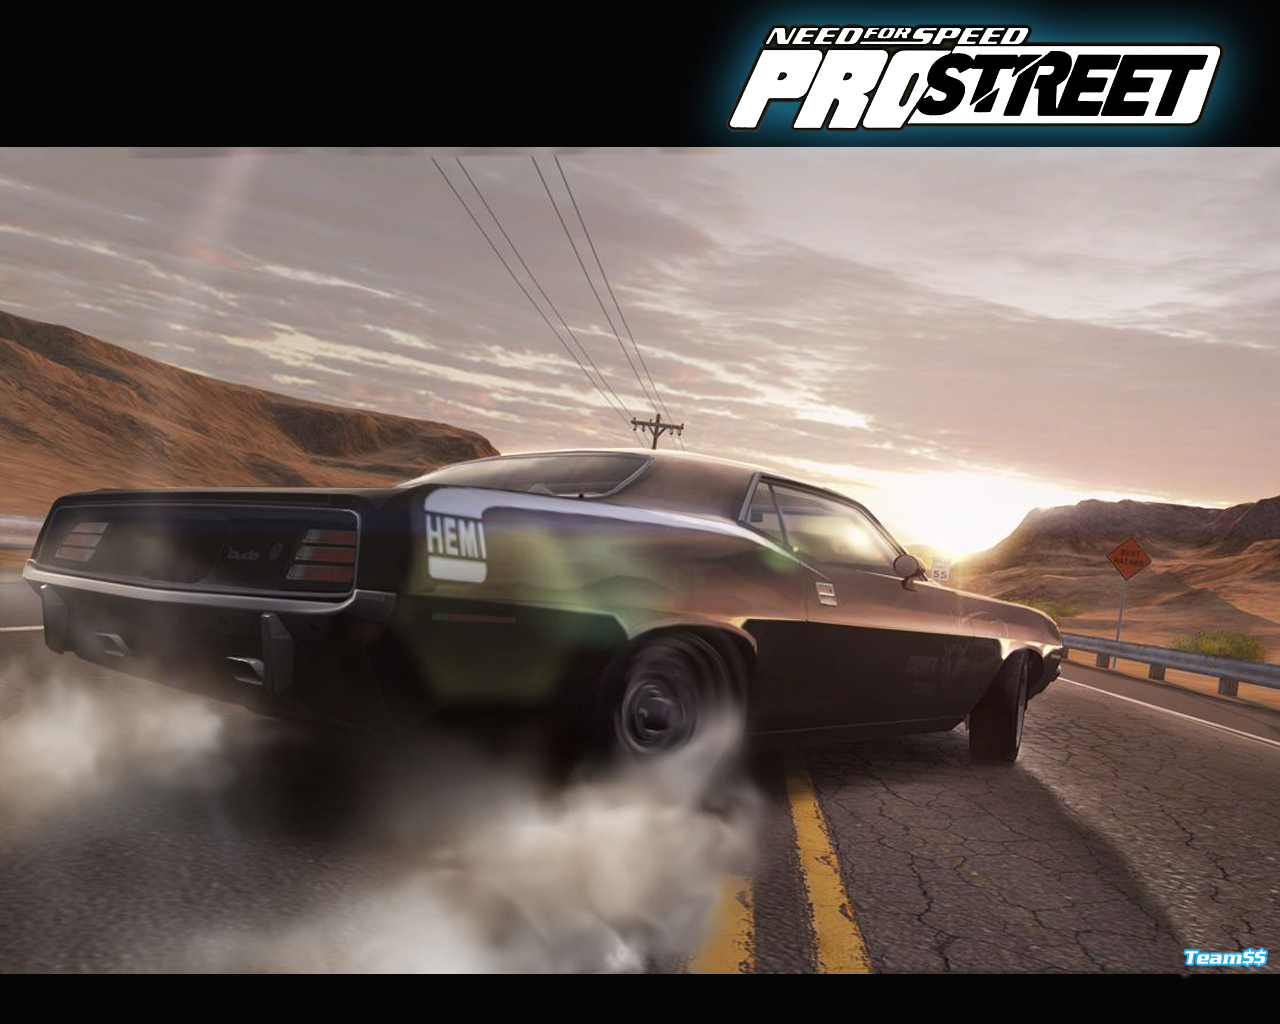 Plymouth Hemi Cuda Need For Speed Prostreet Nfs Ps